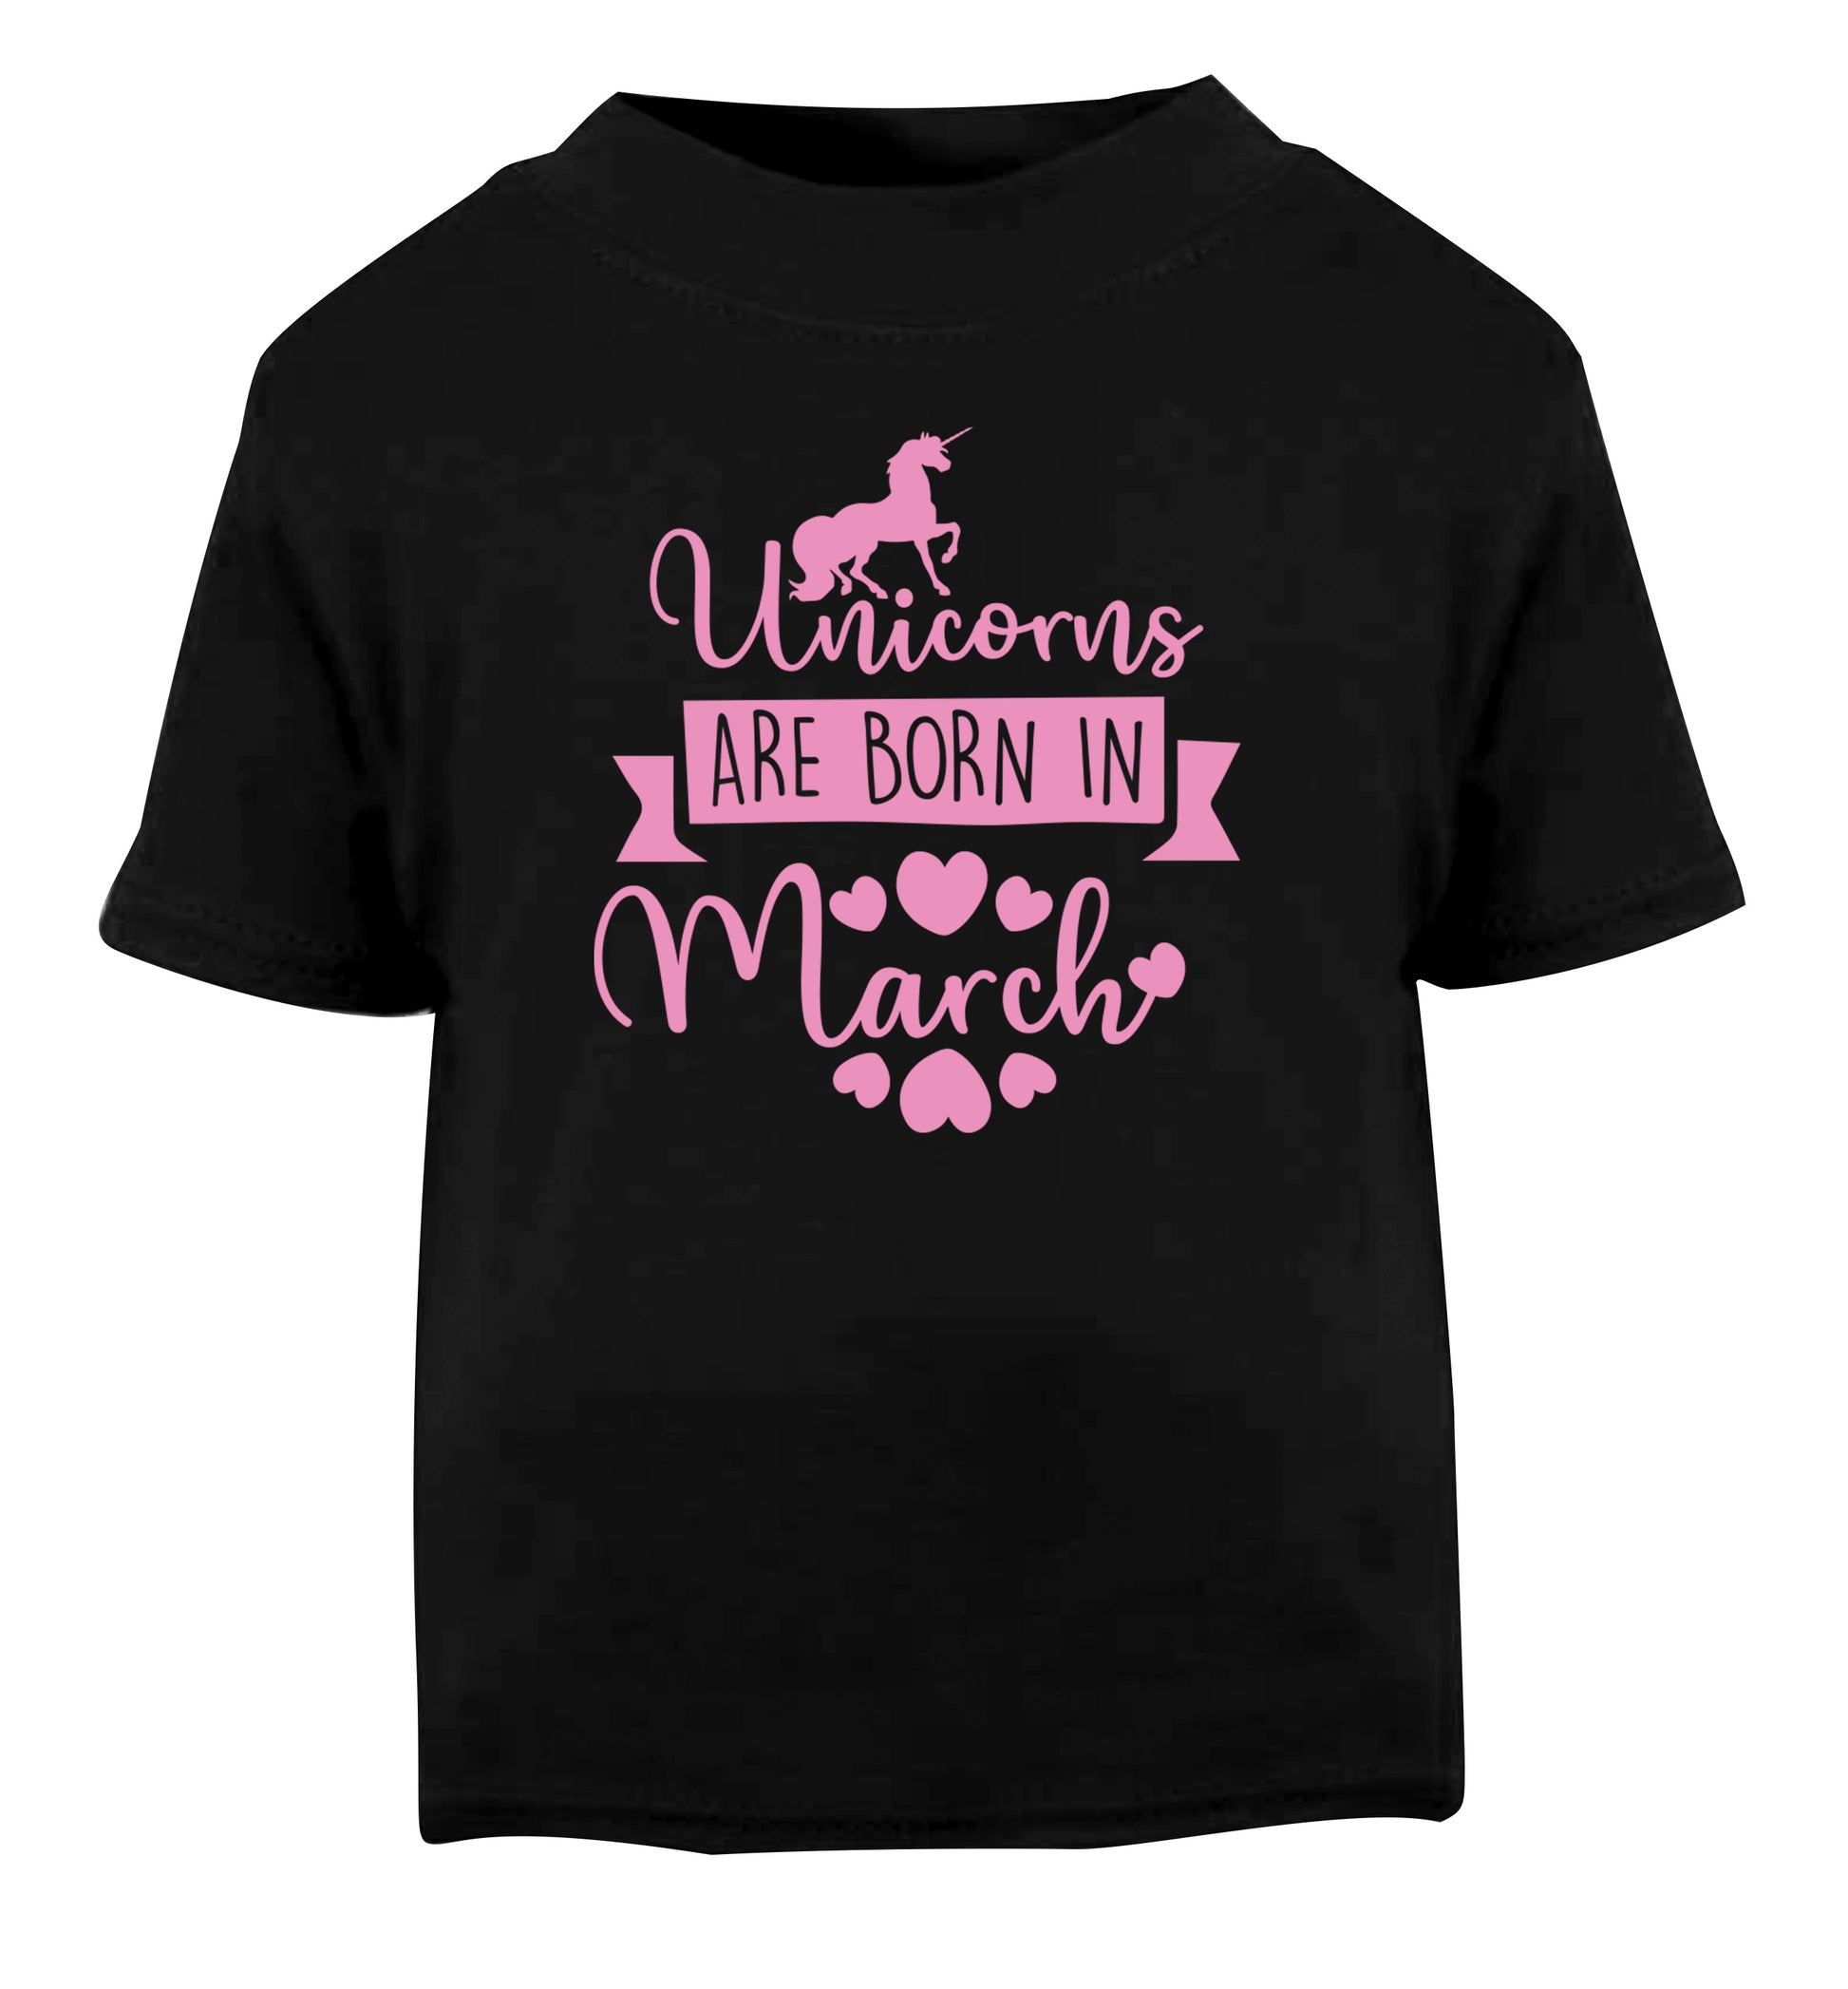 Unicorns are born in March Black Baby Toddler Tshirt 2 years